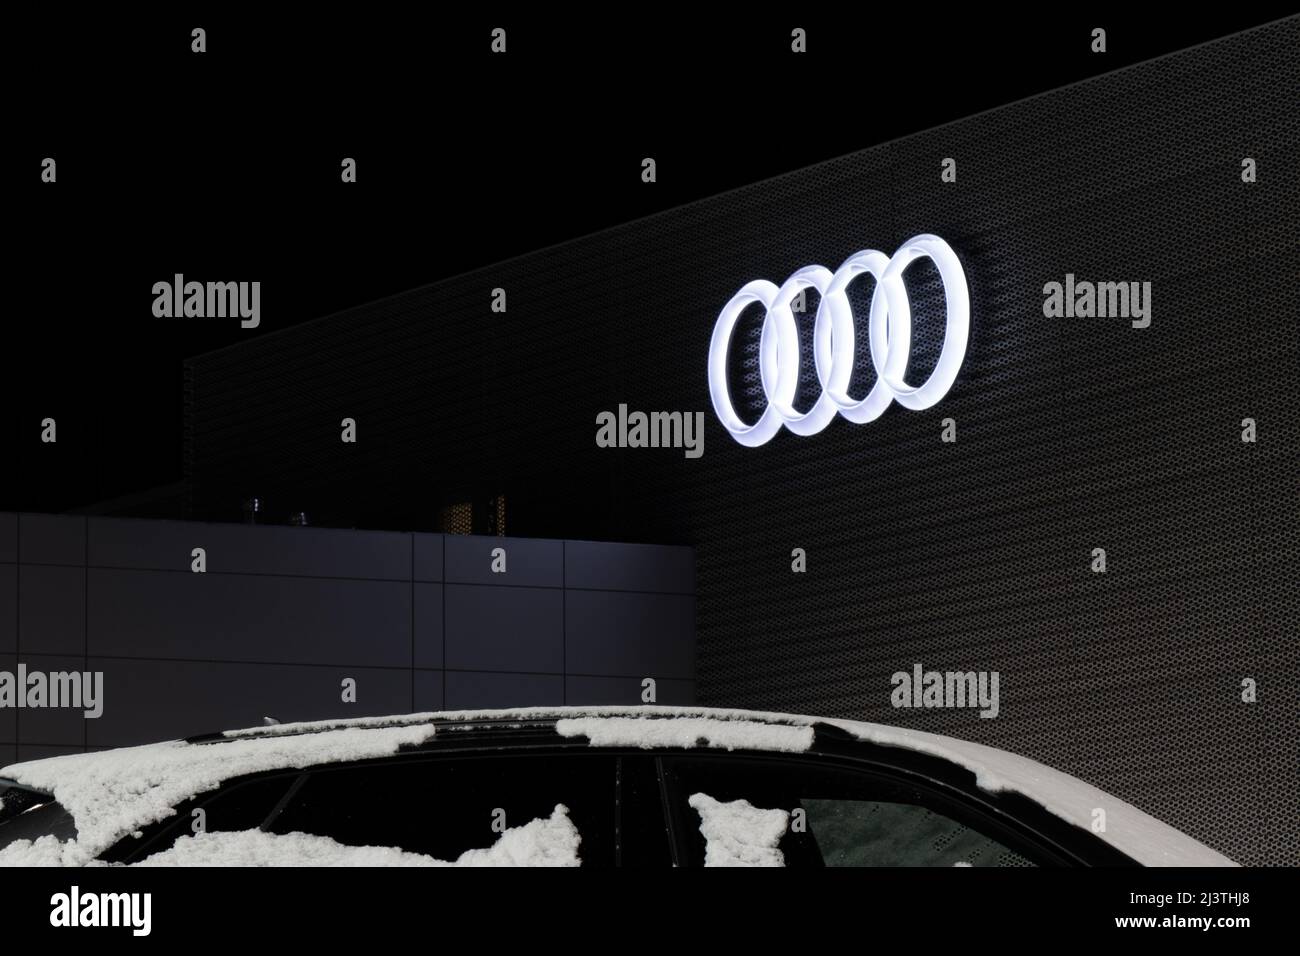 The famous four-ring Audi logo is illuminated at night on the side of an Audi car dealership. Stock Photo